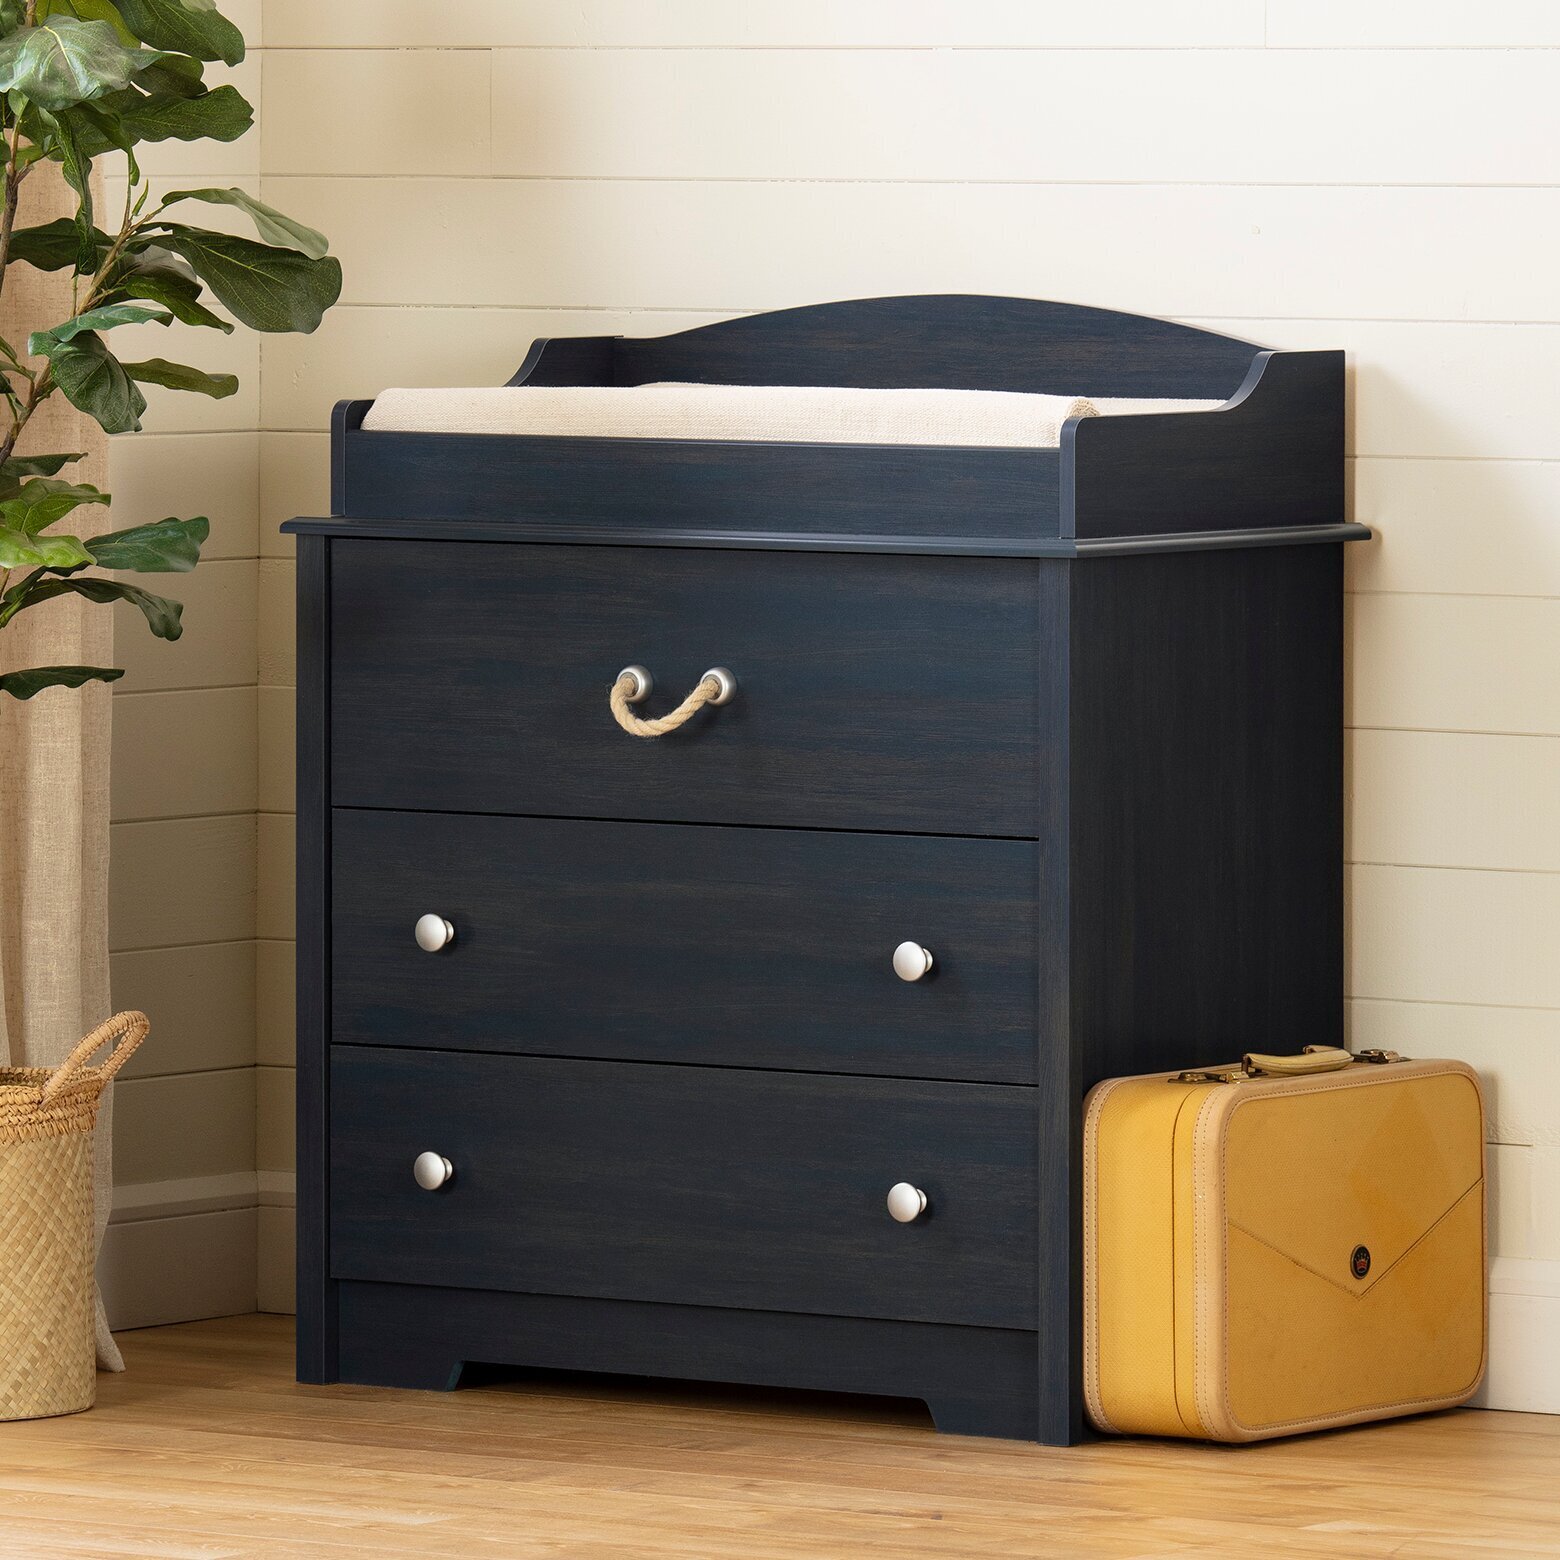 Dark Nautical Style Changing Table With Drawers